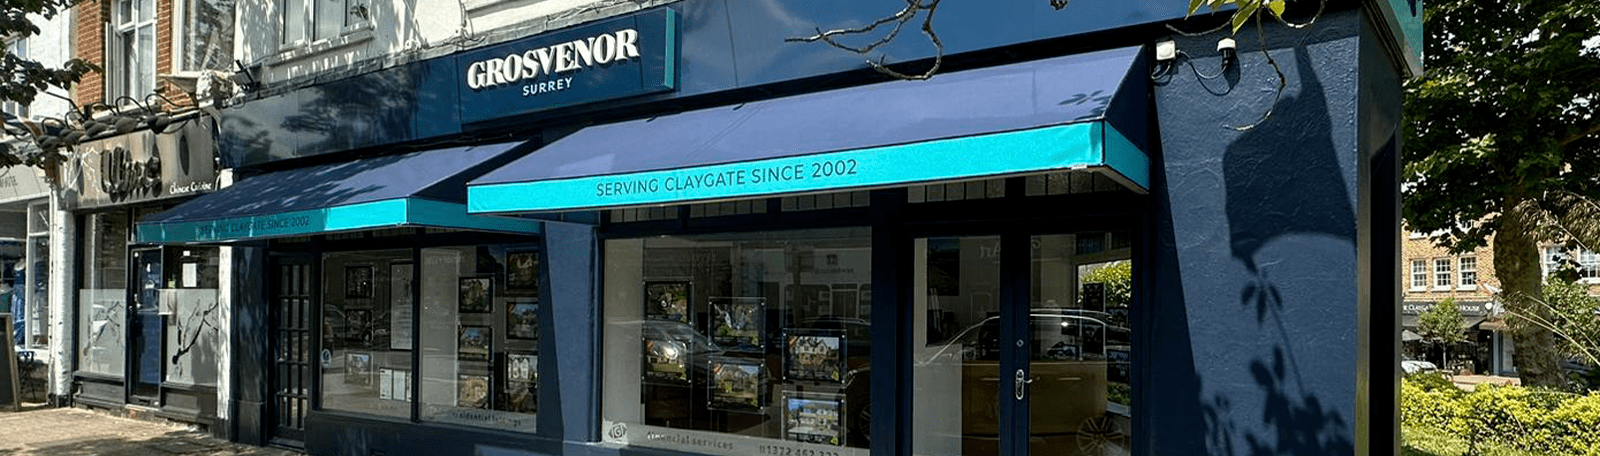 grosvenor's claygate office